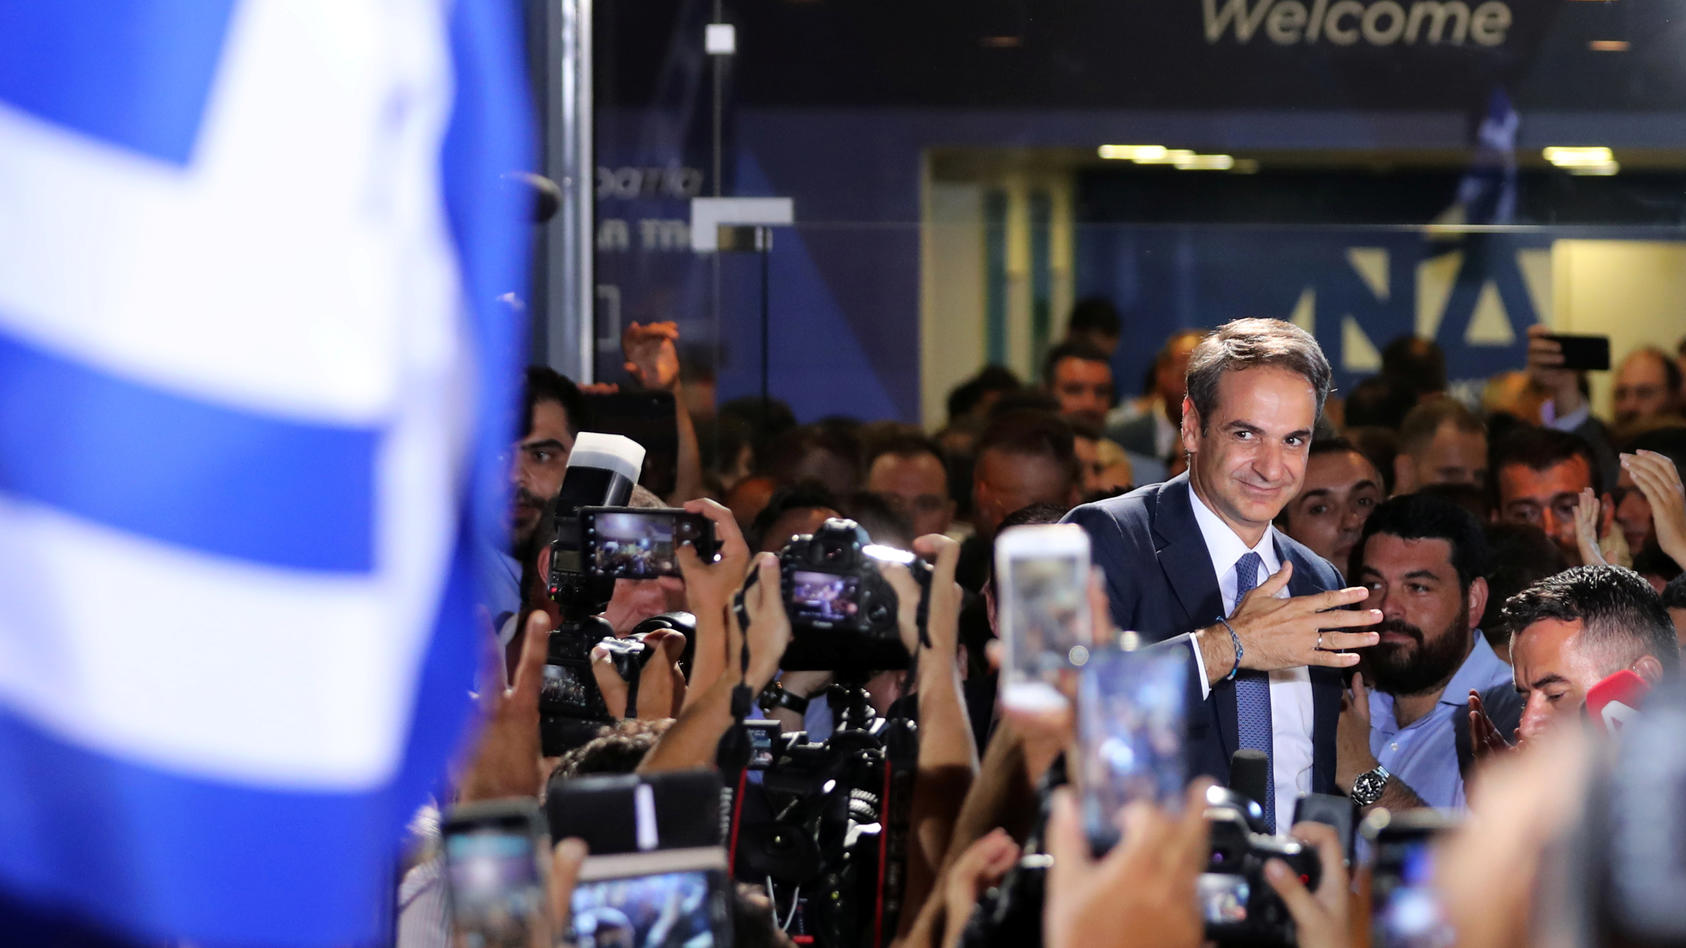 New Democracy conservative party leader Kyriakos Mitsotakis speaks outside party's headquarters, after the general election in Athens, Greece, July 7, 2019. REUTERS/Alkis Konstantinidis     TPX IMAGES OF THE DAY